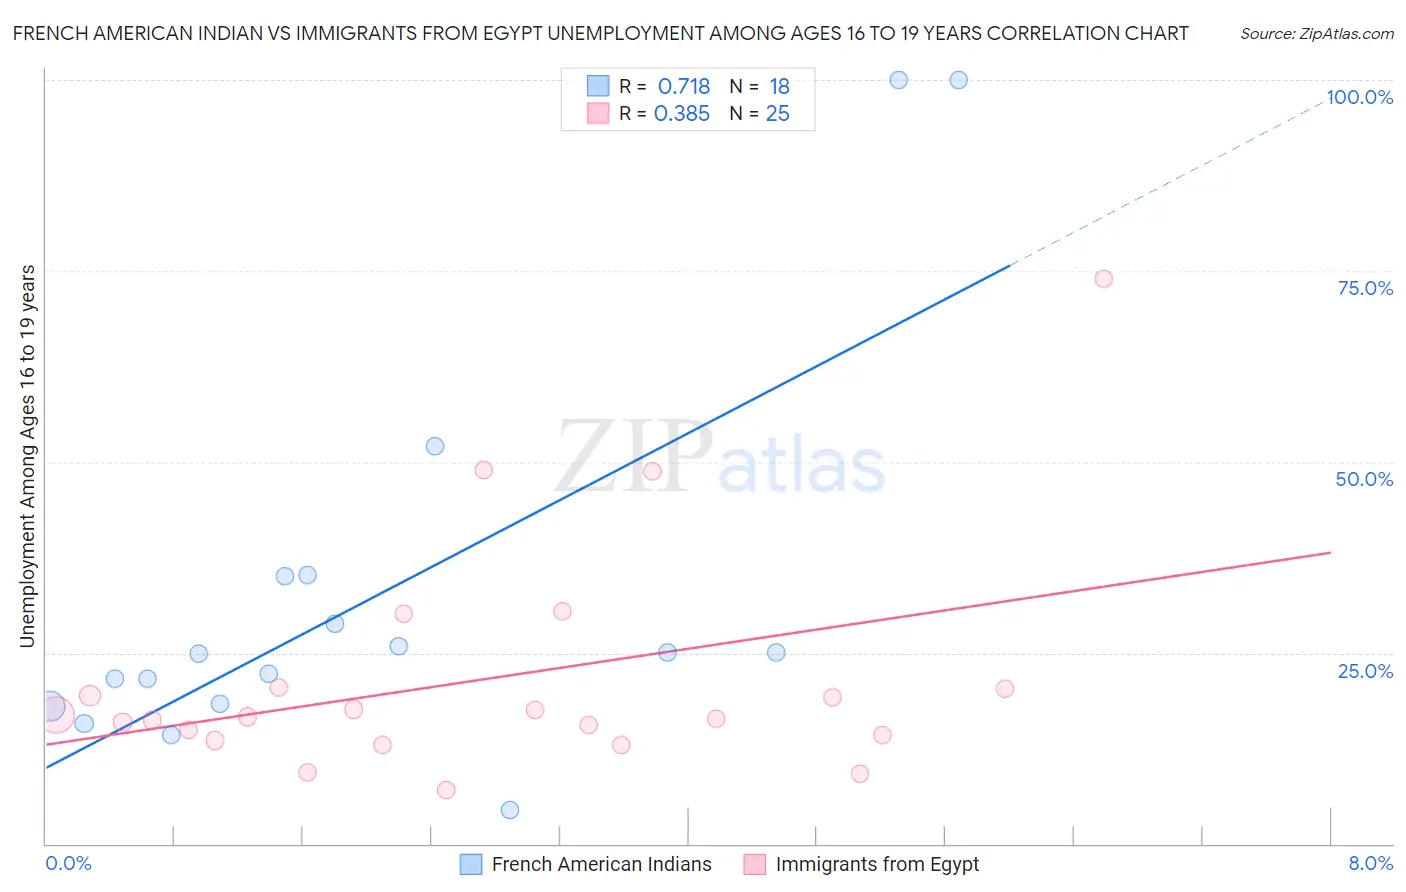 French American Indian vs Immigrants from Egypt Unemployment Among Ages 16 to 19 years